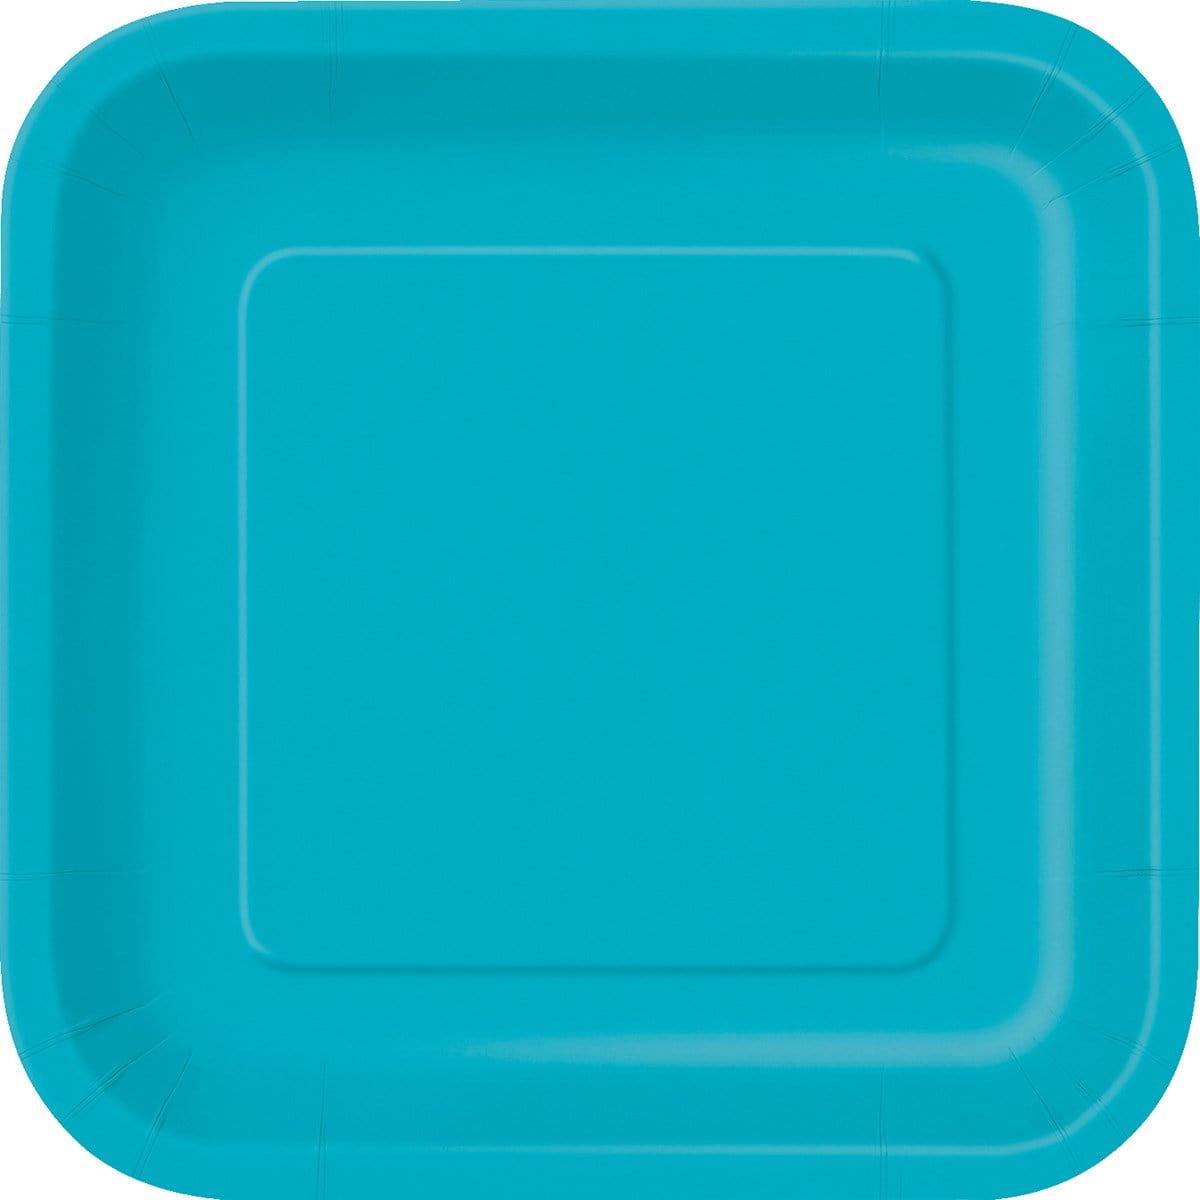 Buy Plasticware Square Paper Plates 9 In. - Caribbean 14/pkg. sold at Party Expert